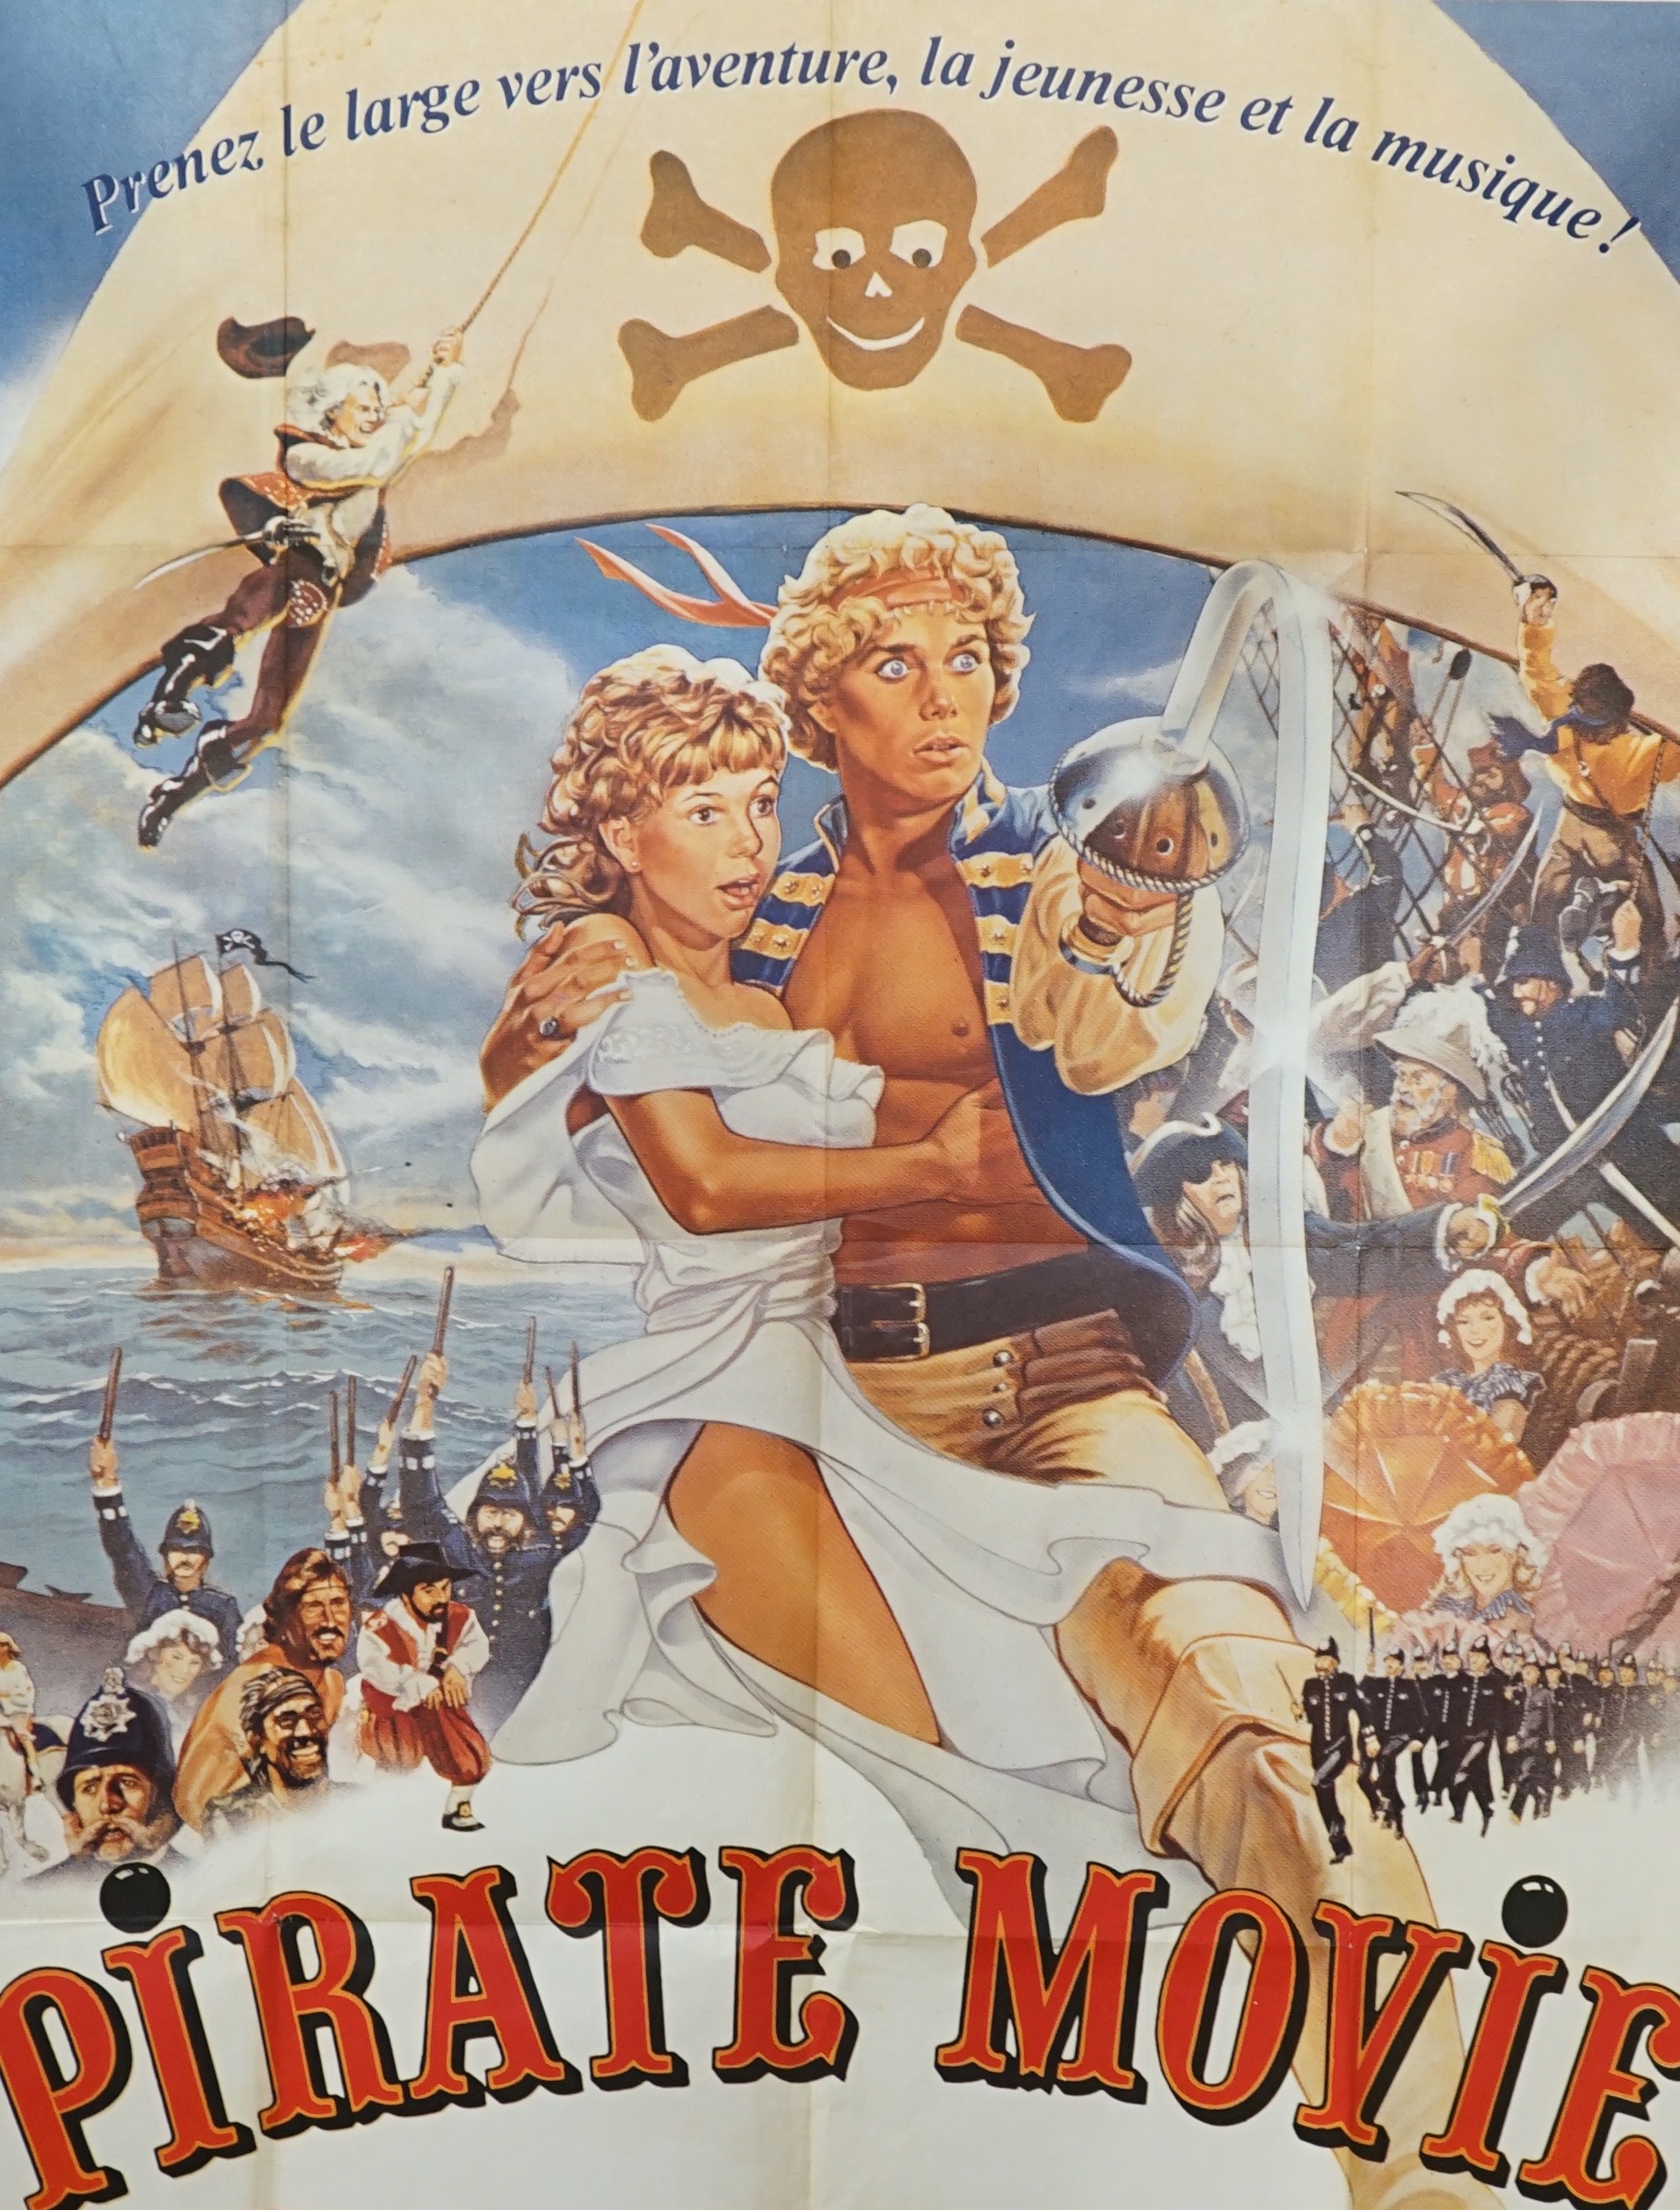 A large Pirate Movie film poster, 1982